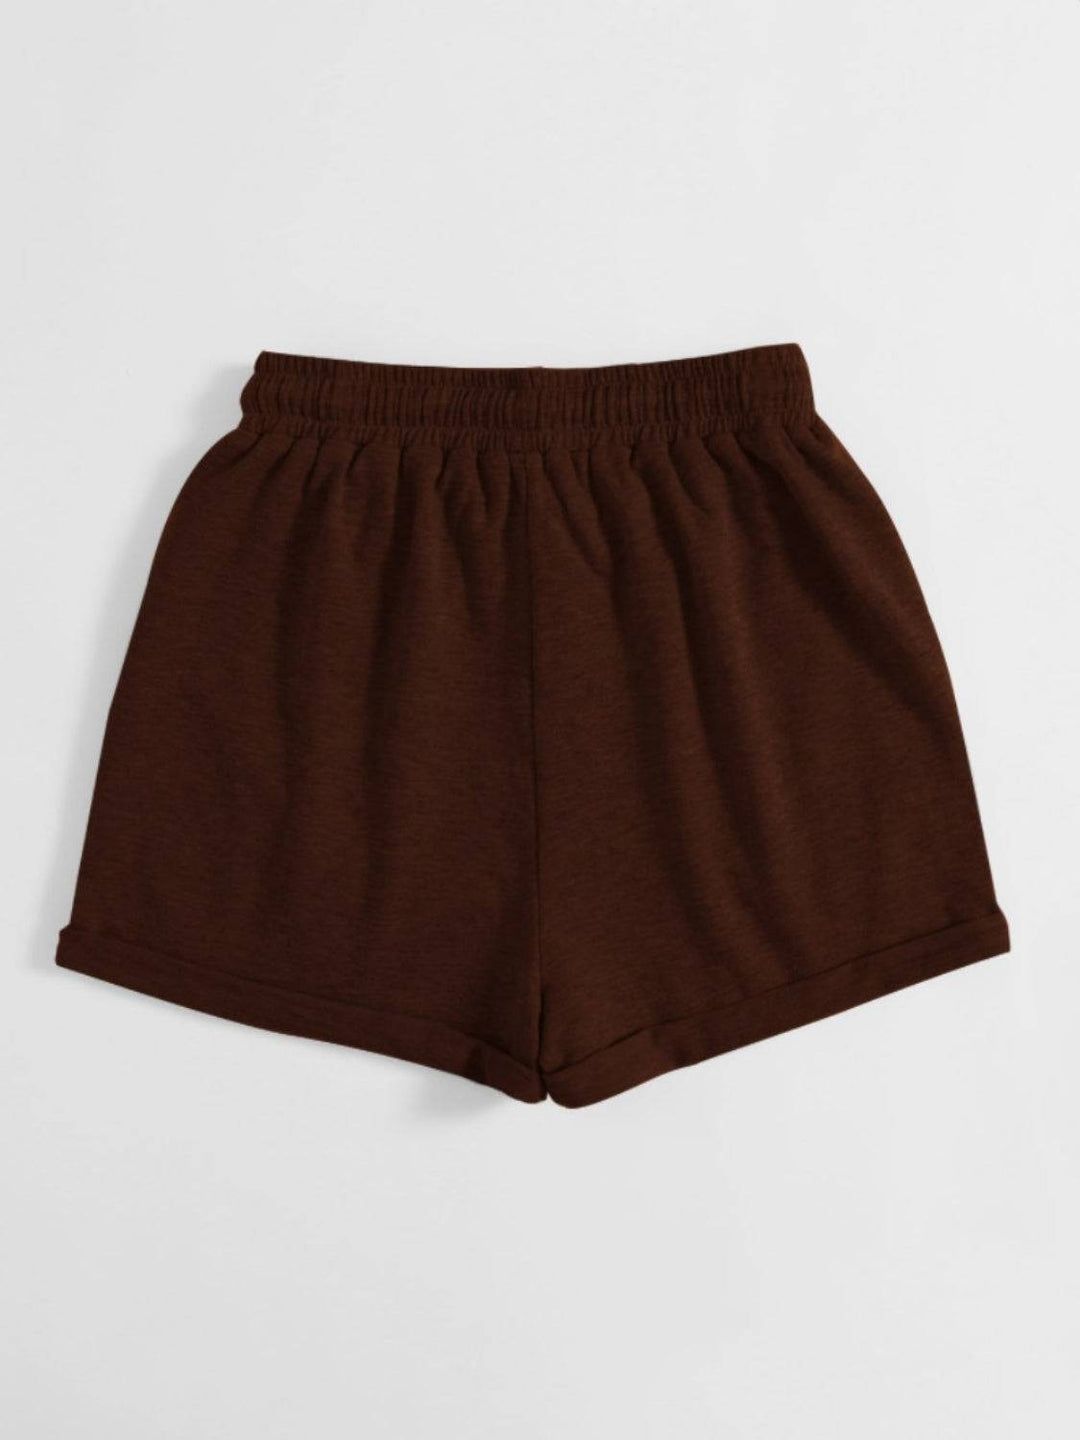 a pair of brown shorts on a white background